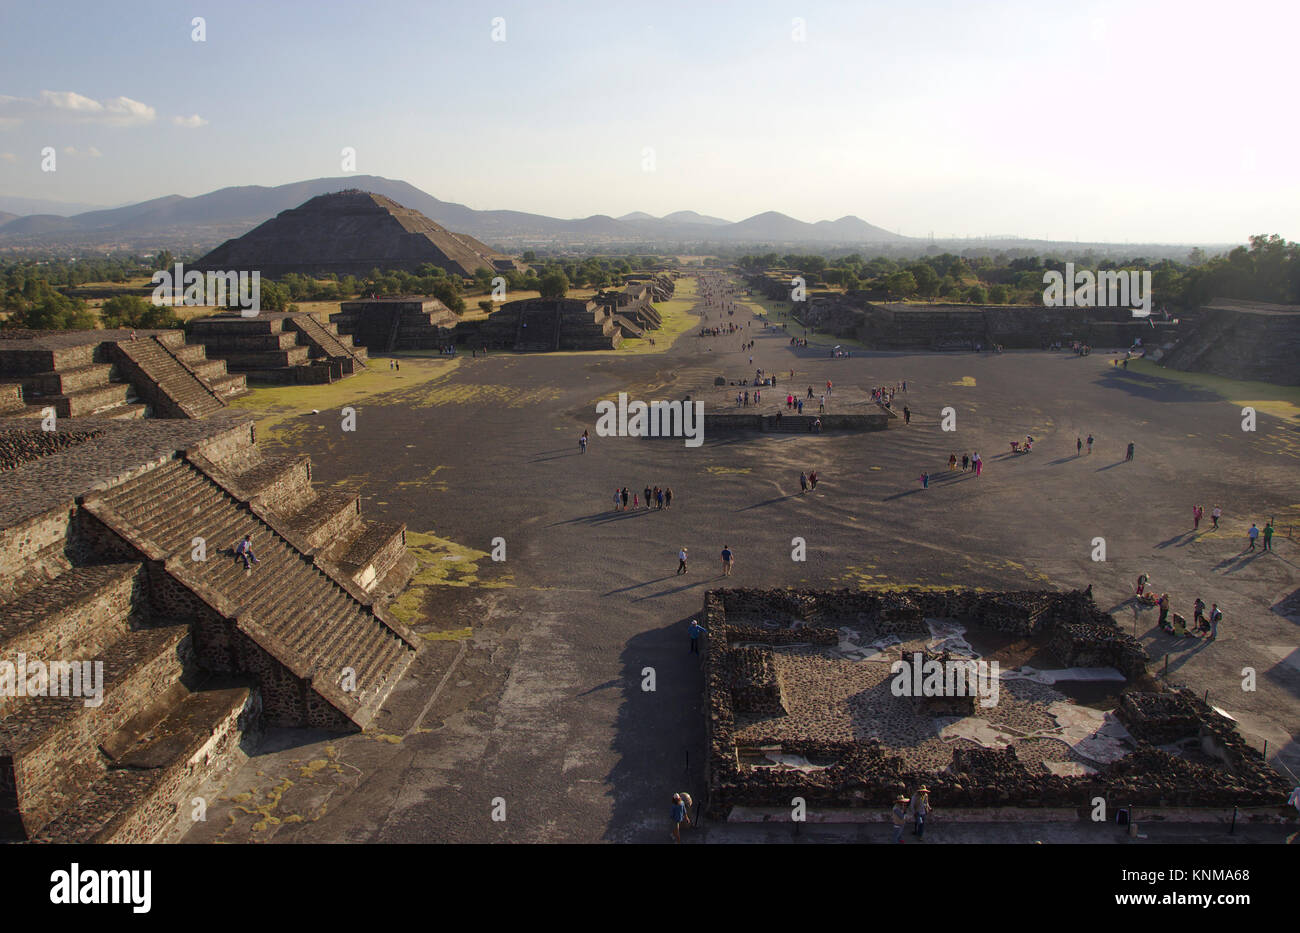 Teotihuacán, view from Pyramid of the Moon to Pyramid of the sun and Avenue of the dead, Mexico Stock Photo